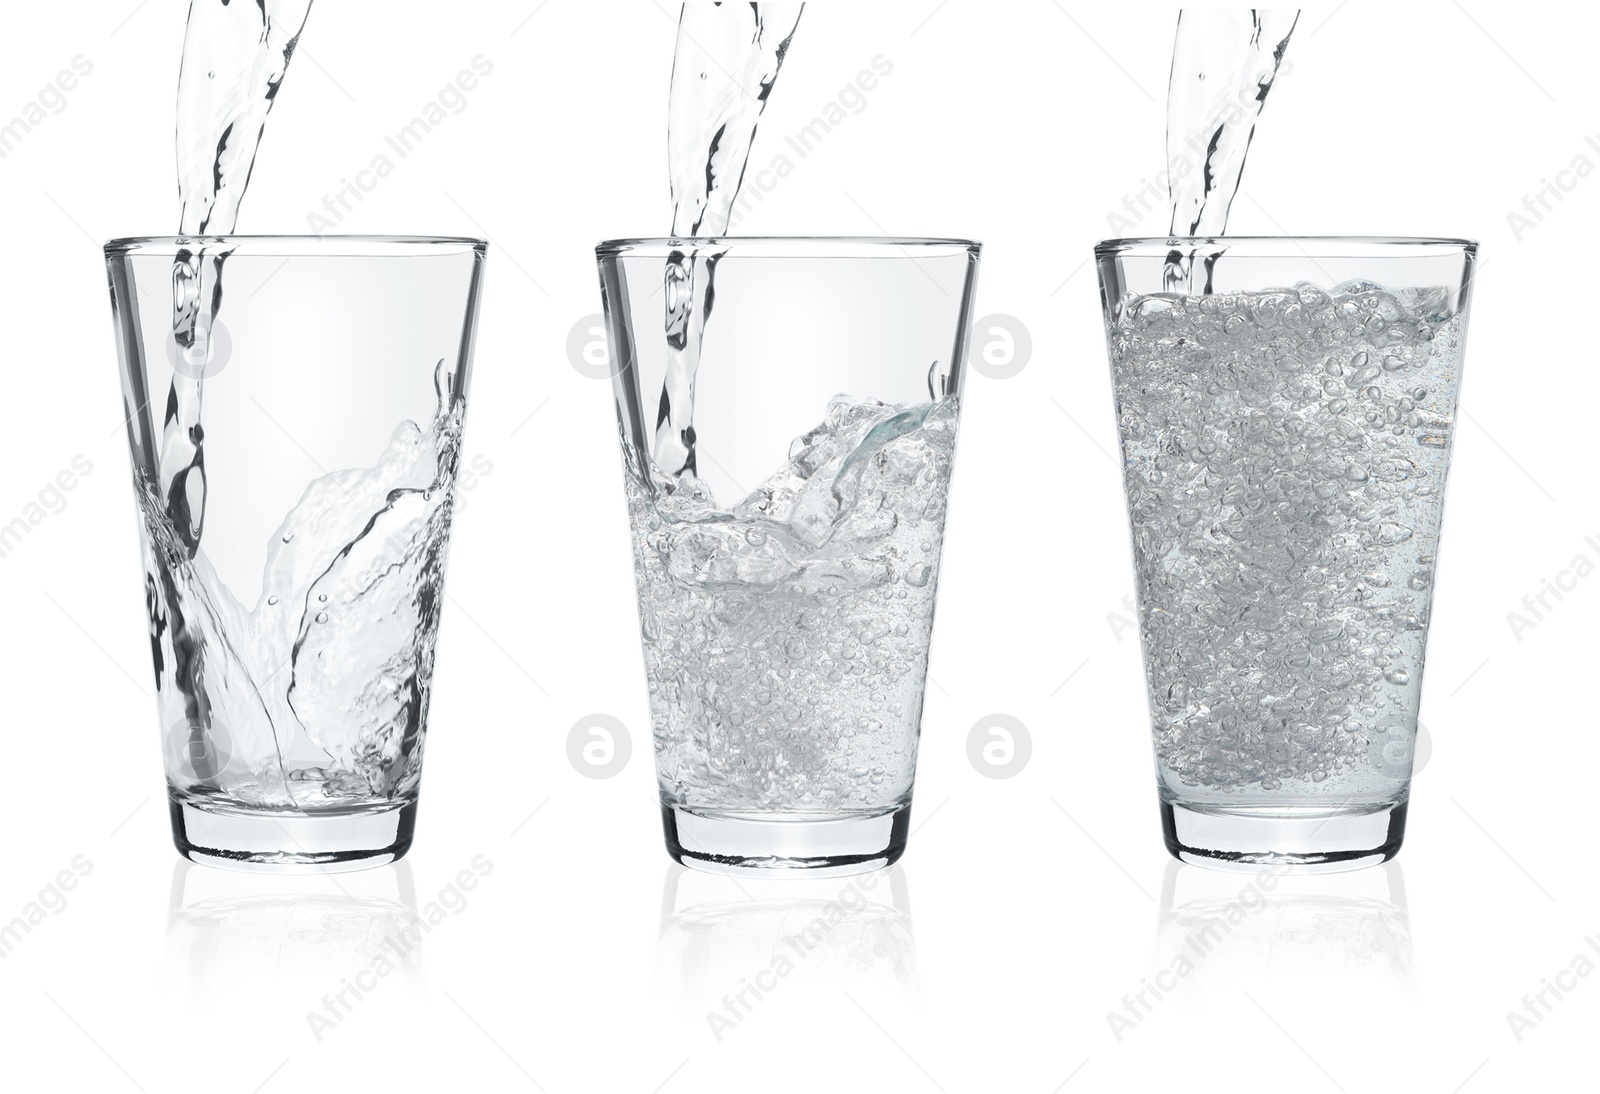 Image of Pouring soda water into glasses on white background, collage